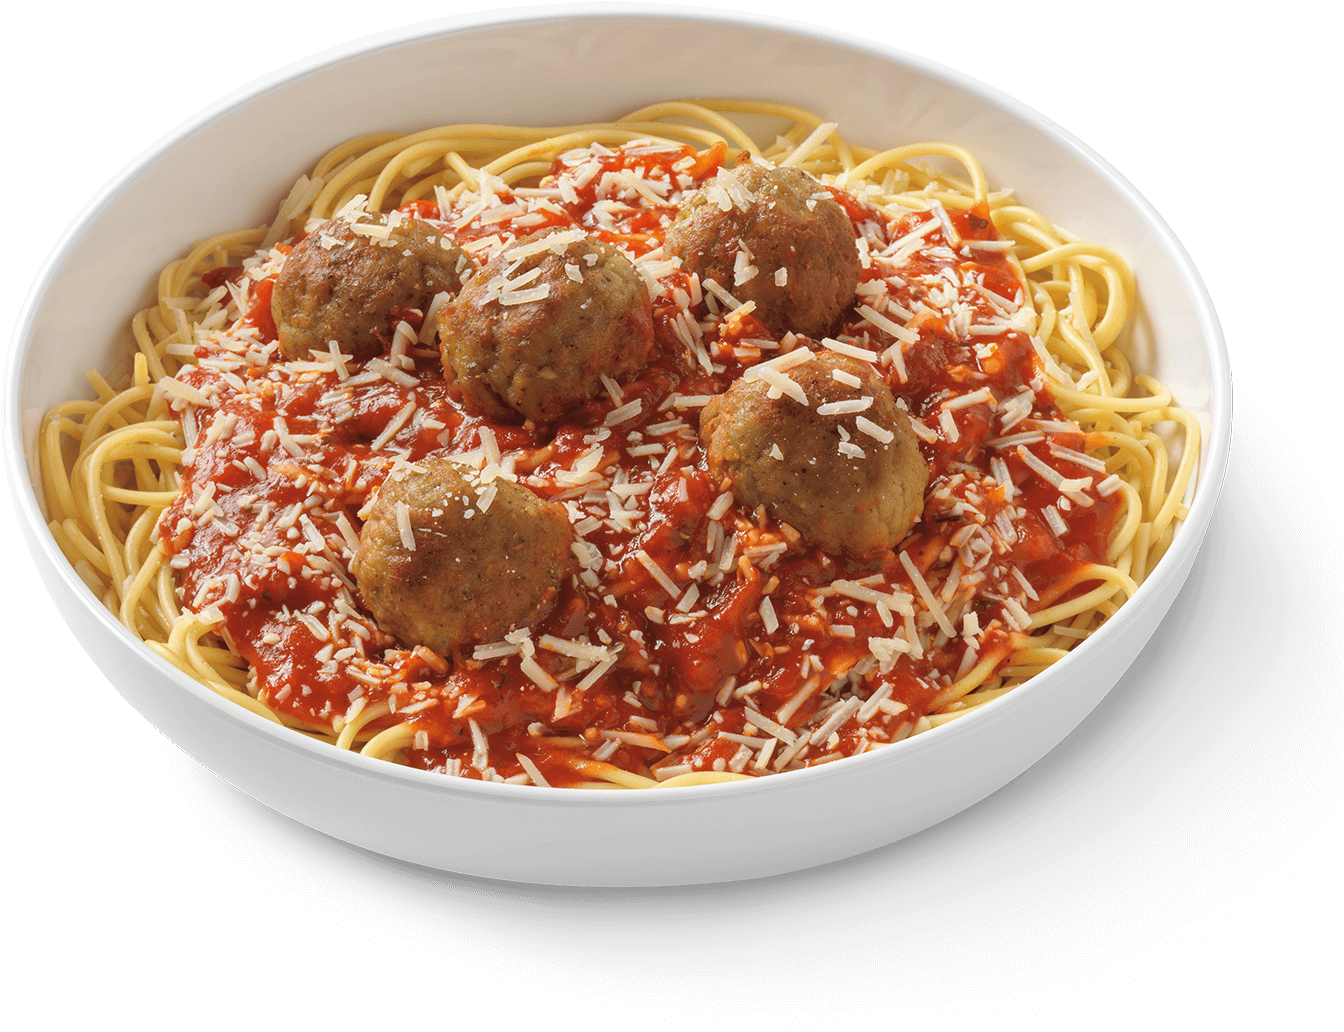 A Bowl Of Spaghetti With Meatballs And Grated Cheese